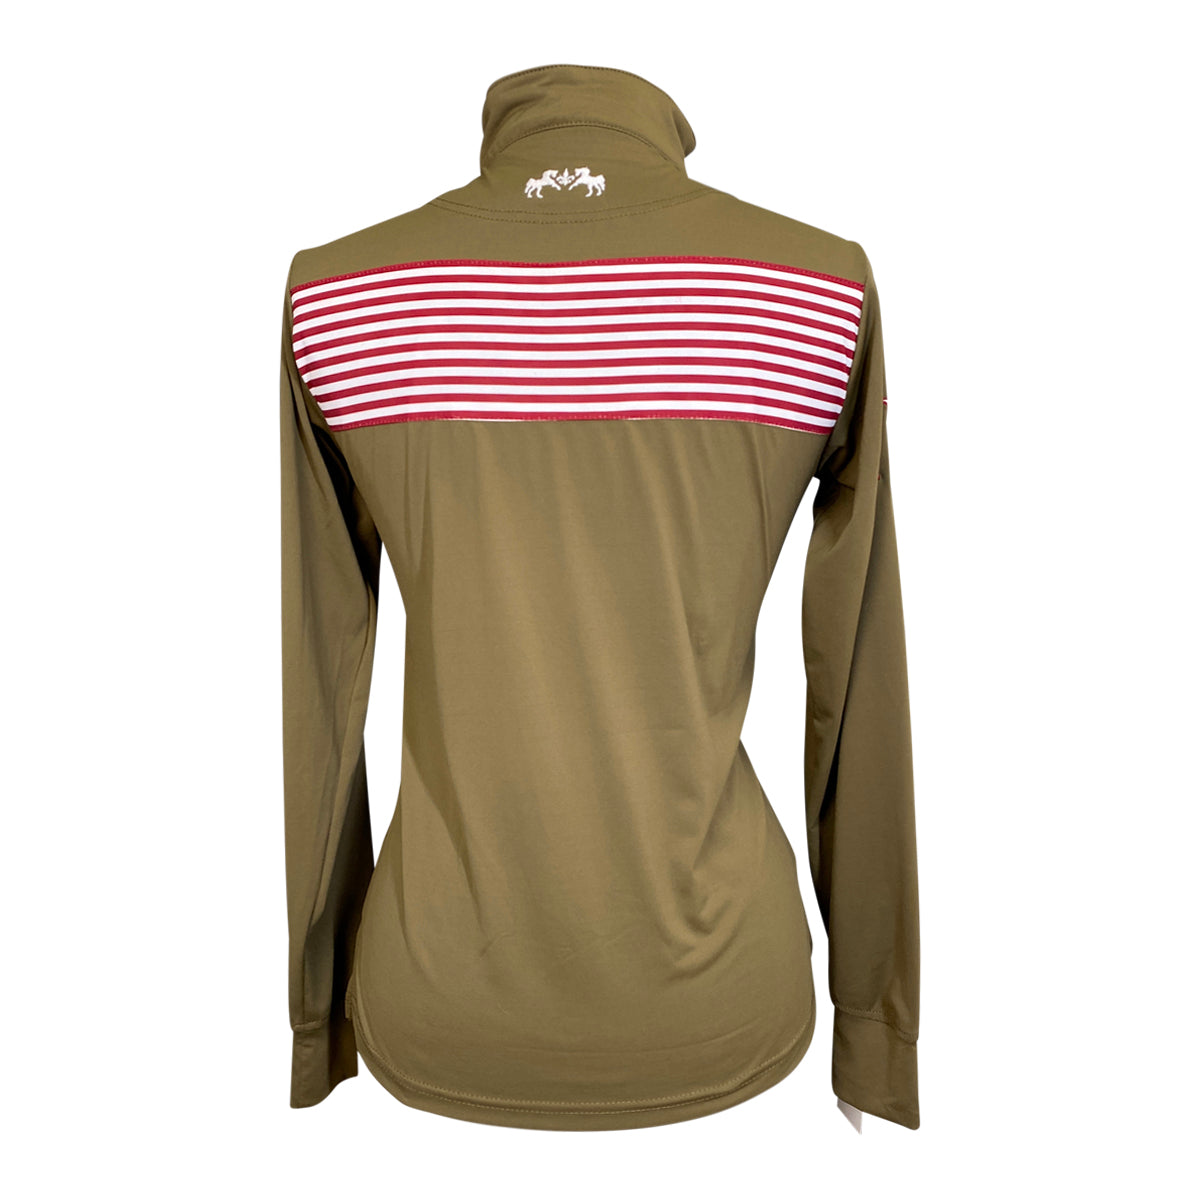 Equine Couture 'Patriot' Sport Shirt in Camel w/Red & White Stripes